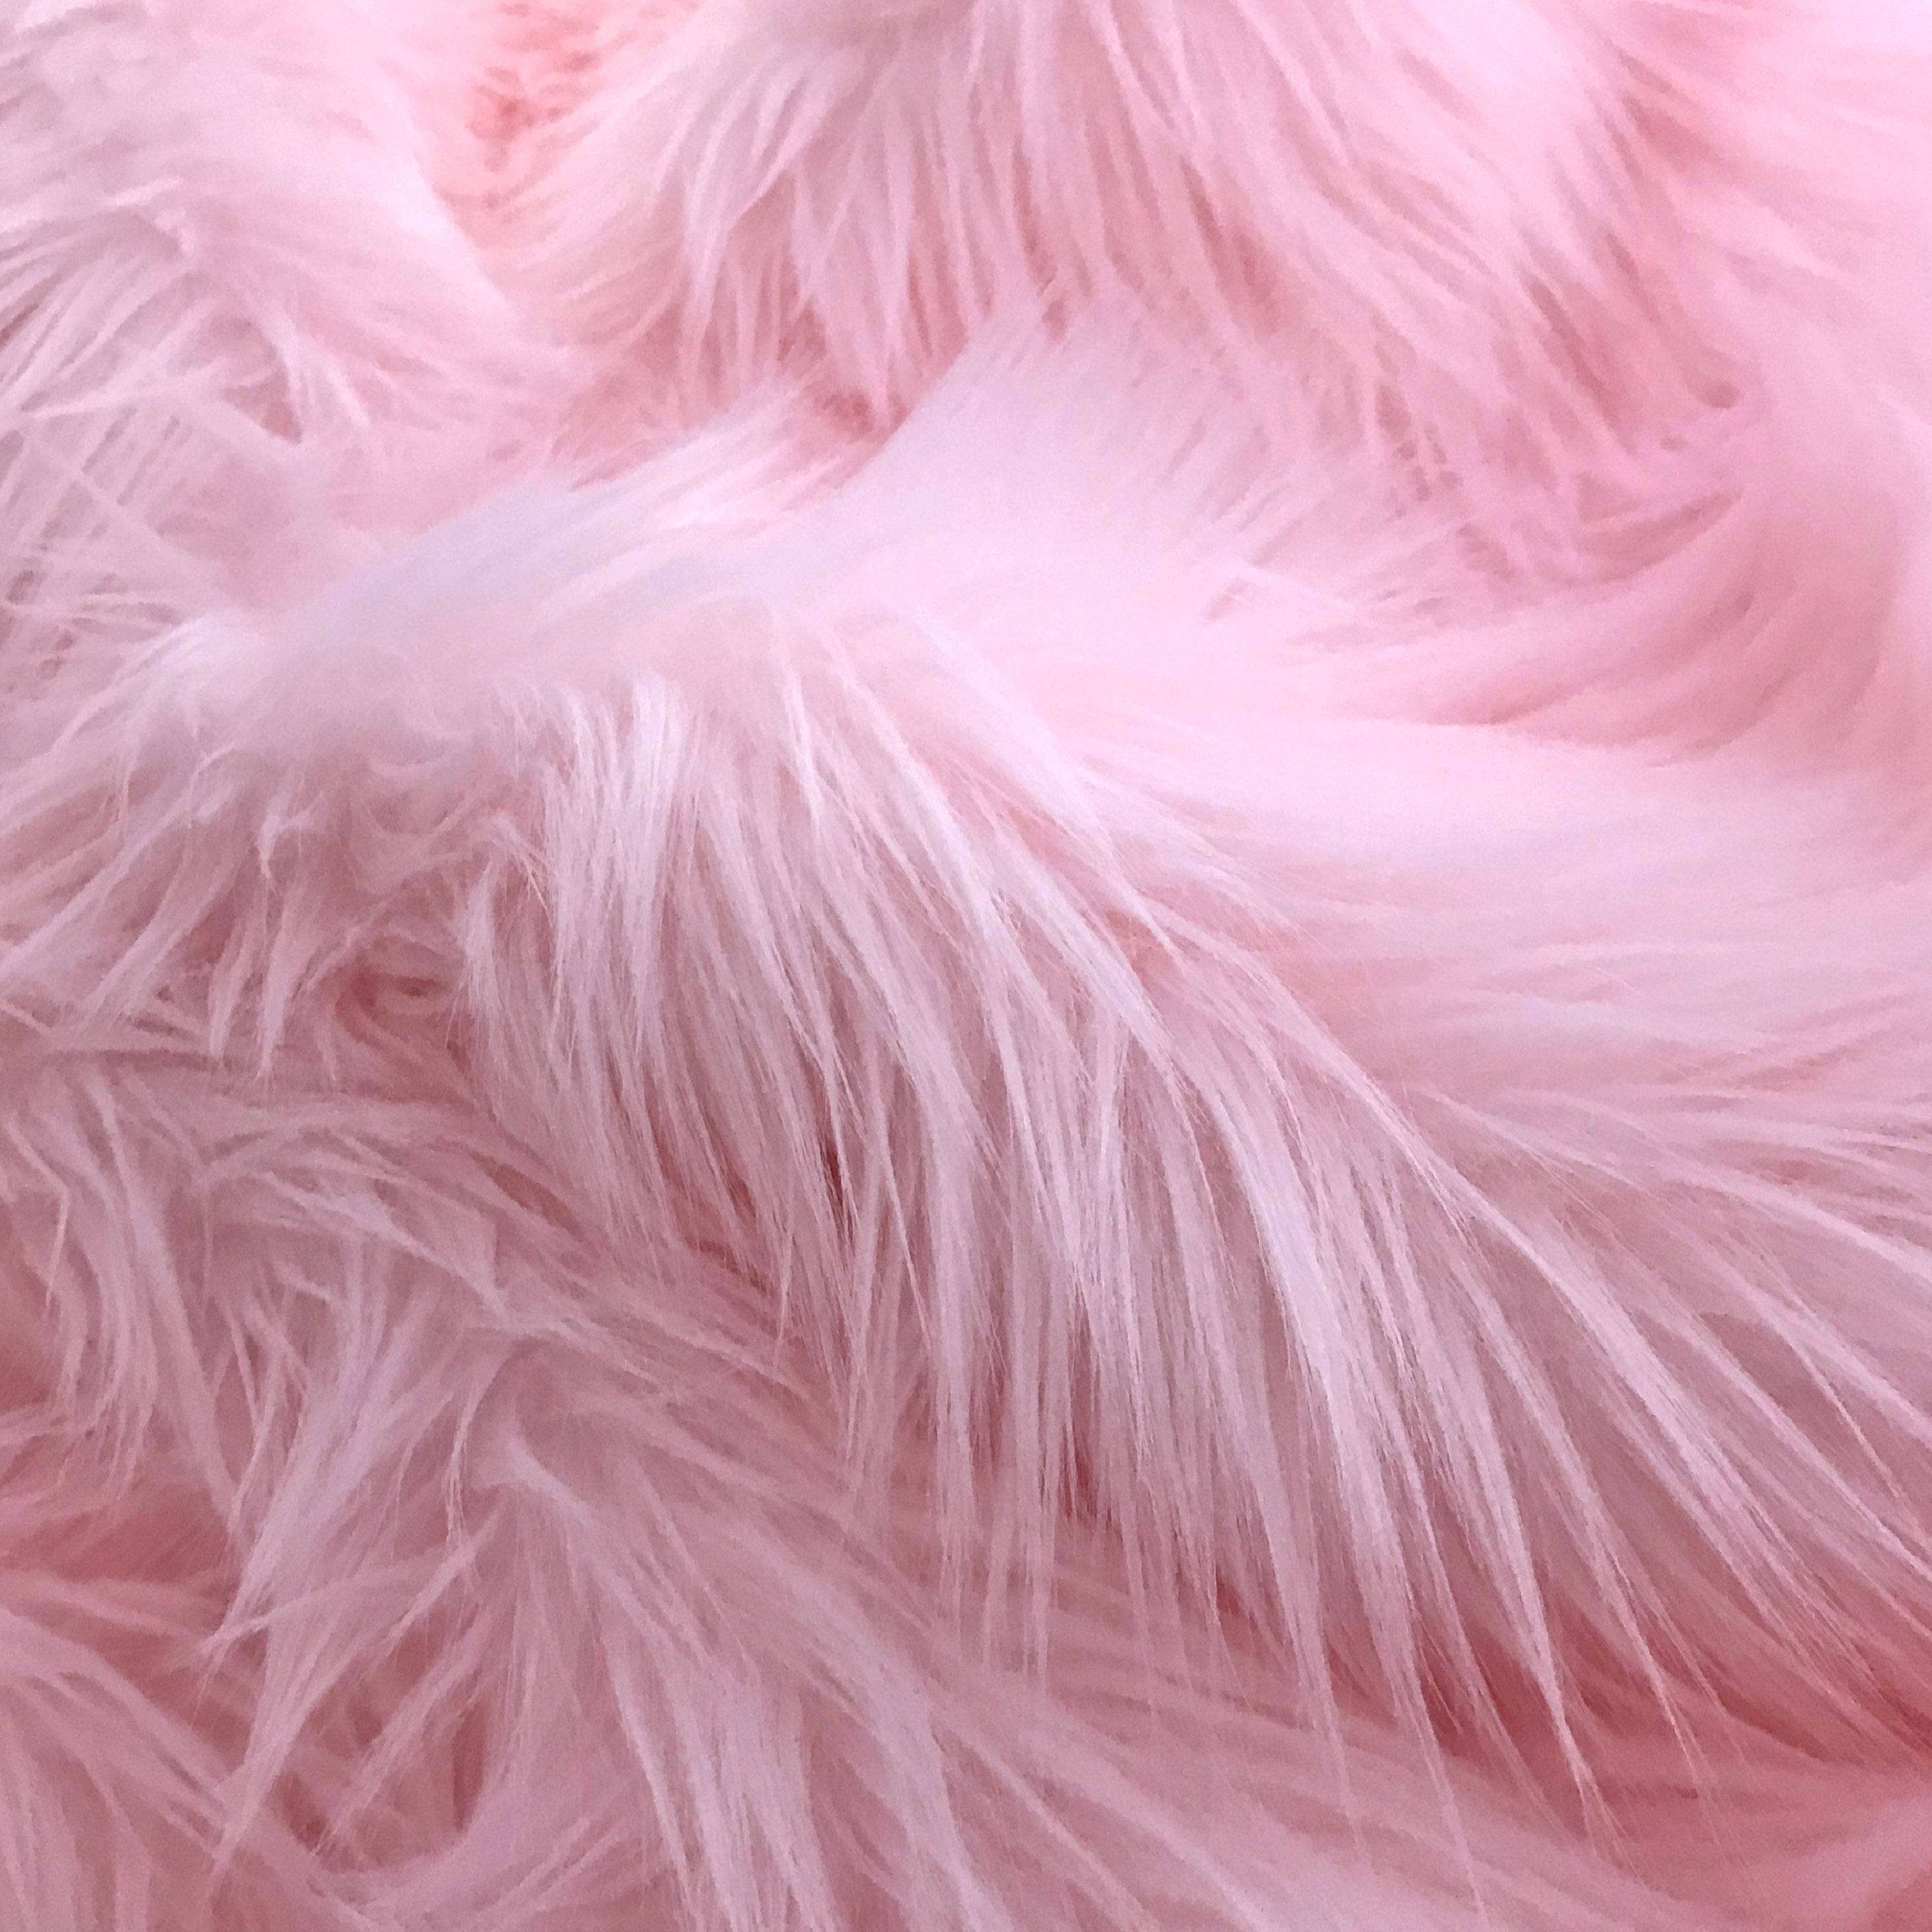 Bianna by the Yard PASTEL BABY PINK Long Pile Faux Fur Fabric Shag Material  for Crafts Fursuit Cosplay Costumes 